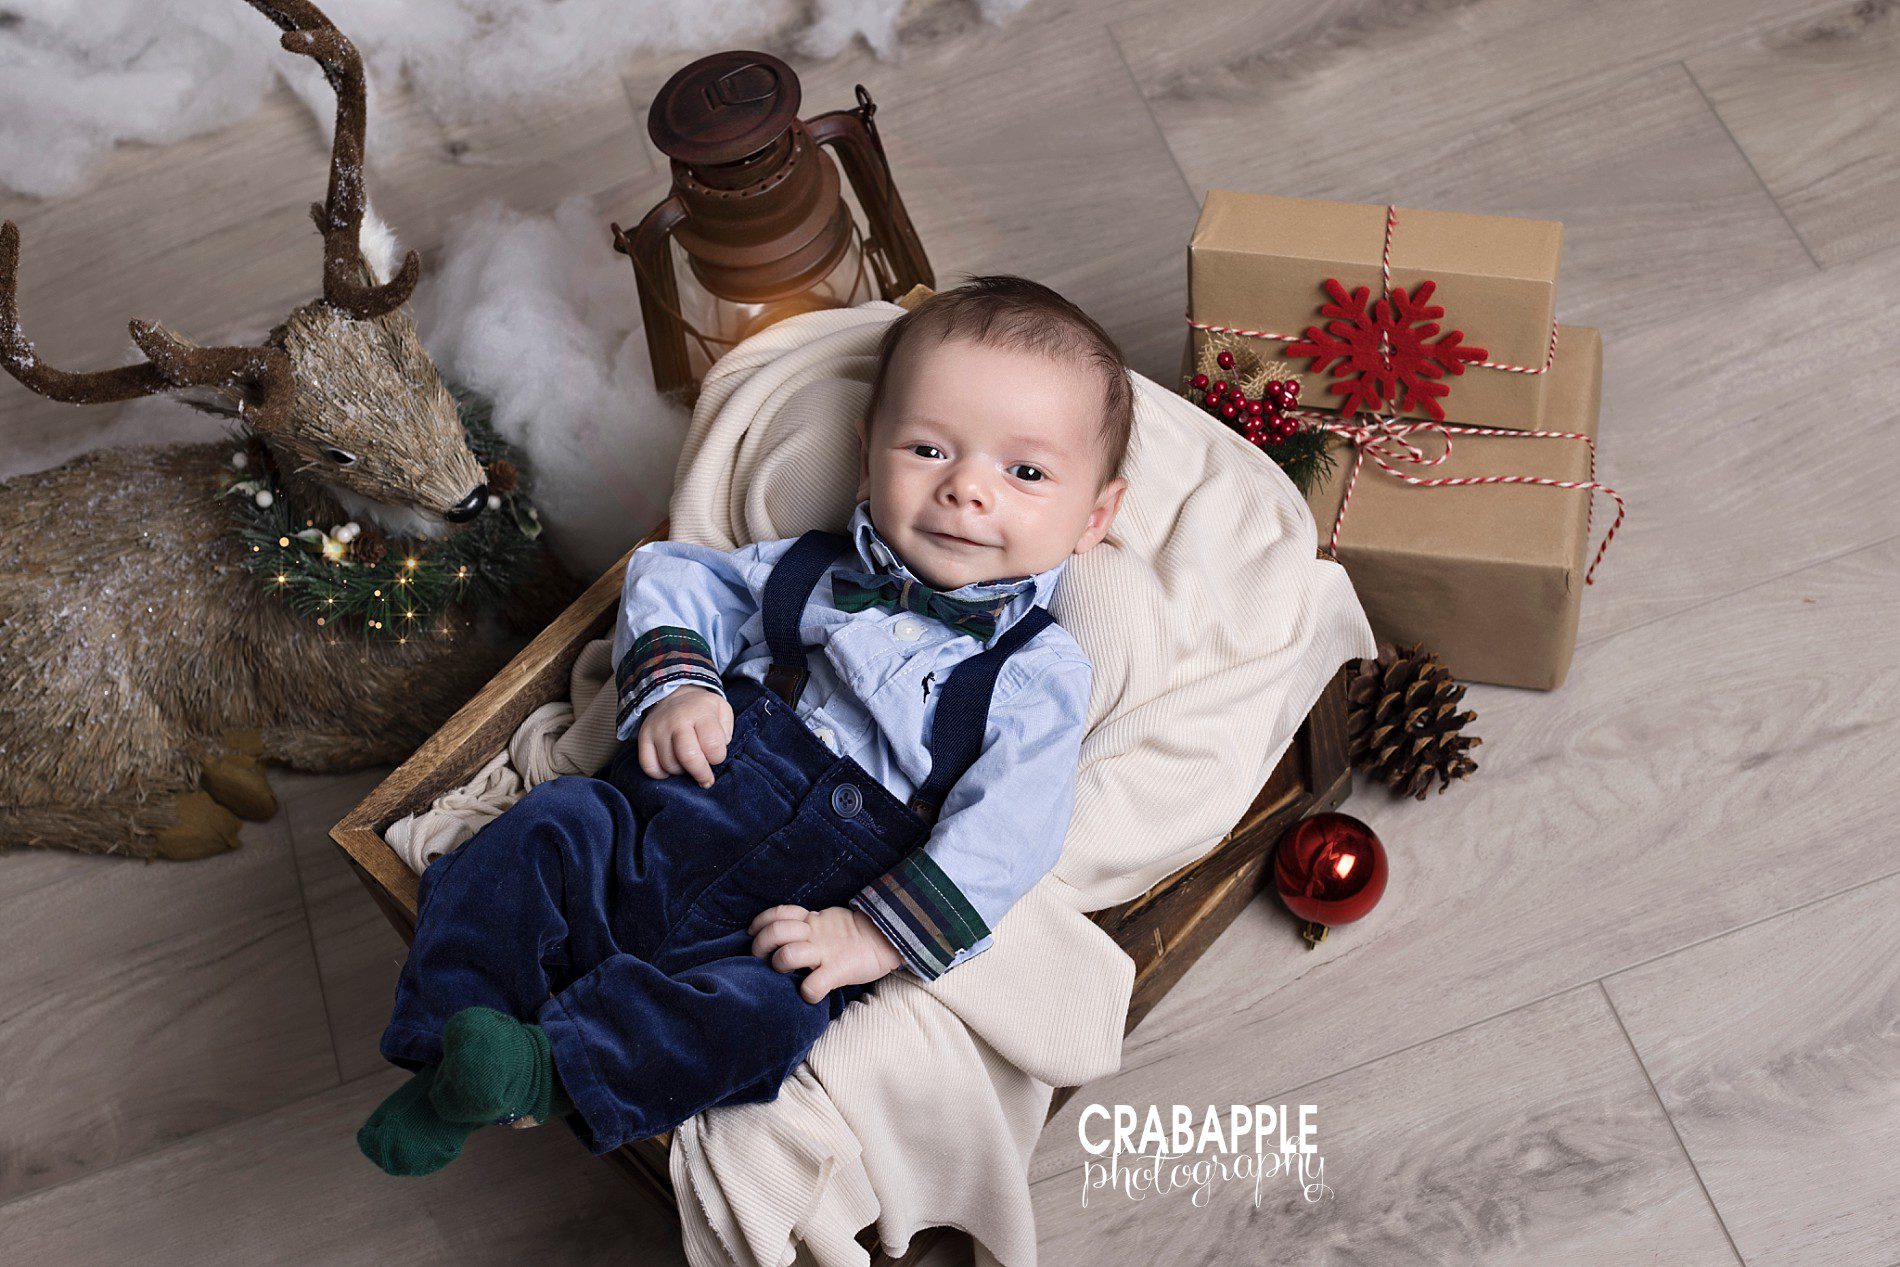 formal outfits for baby christmas photos